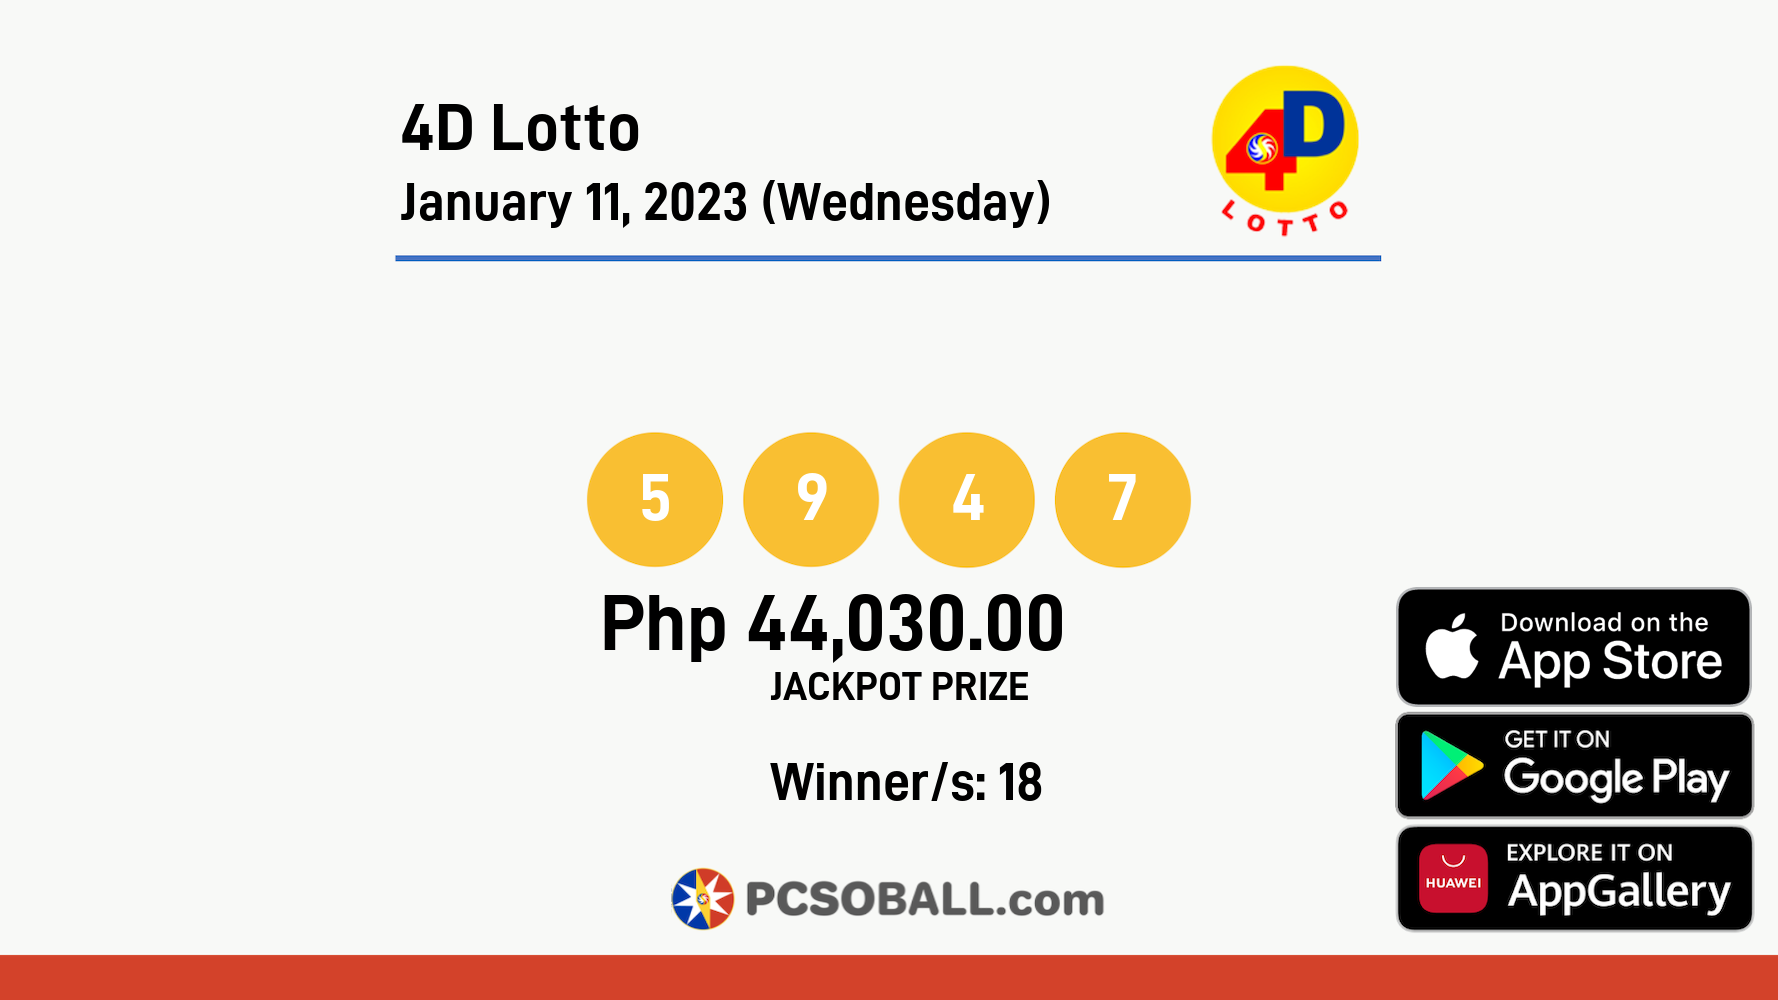 4D Lotto January 11, 2023 (Wednesday) Result